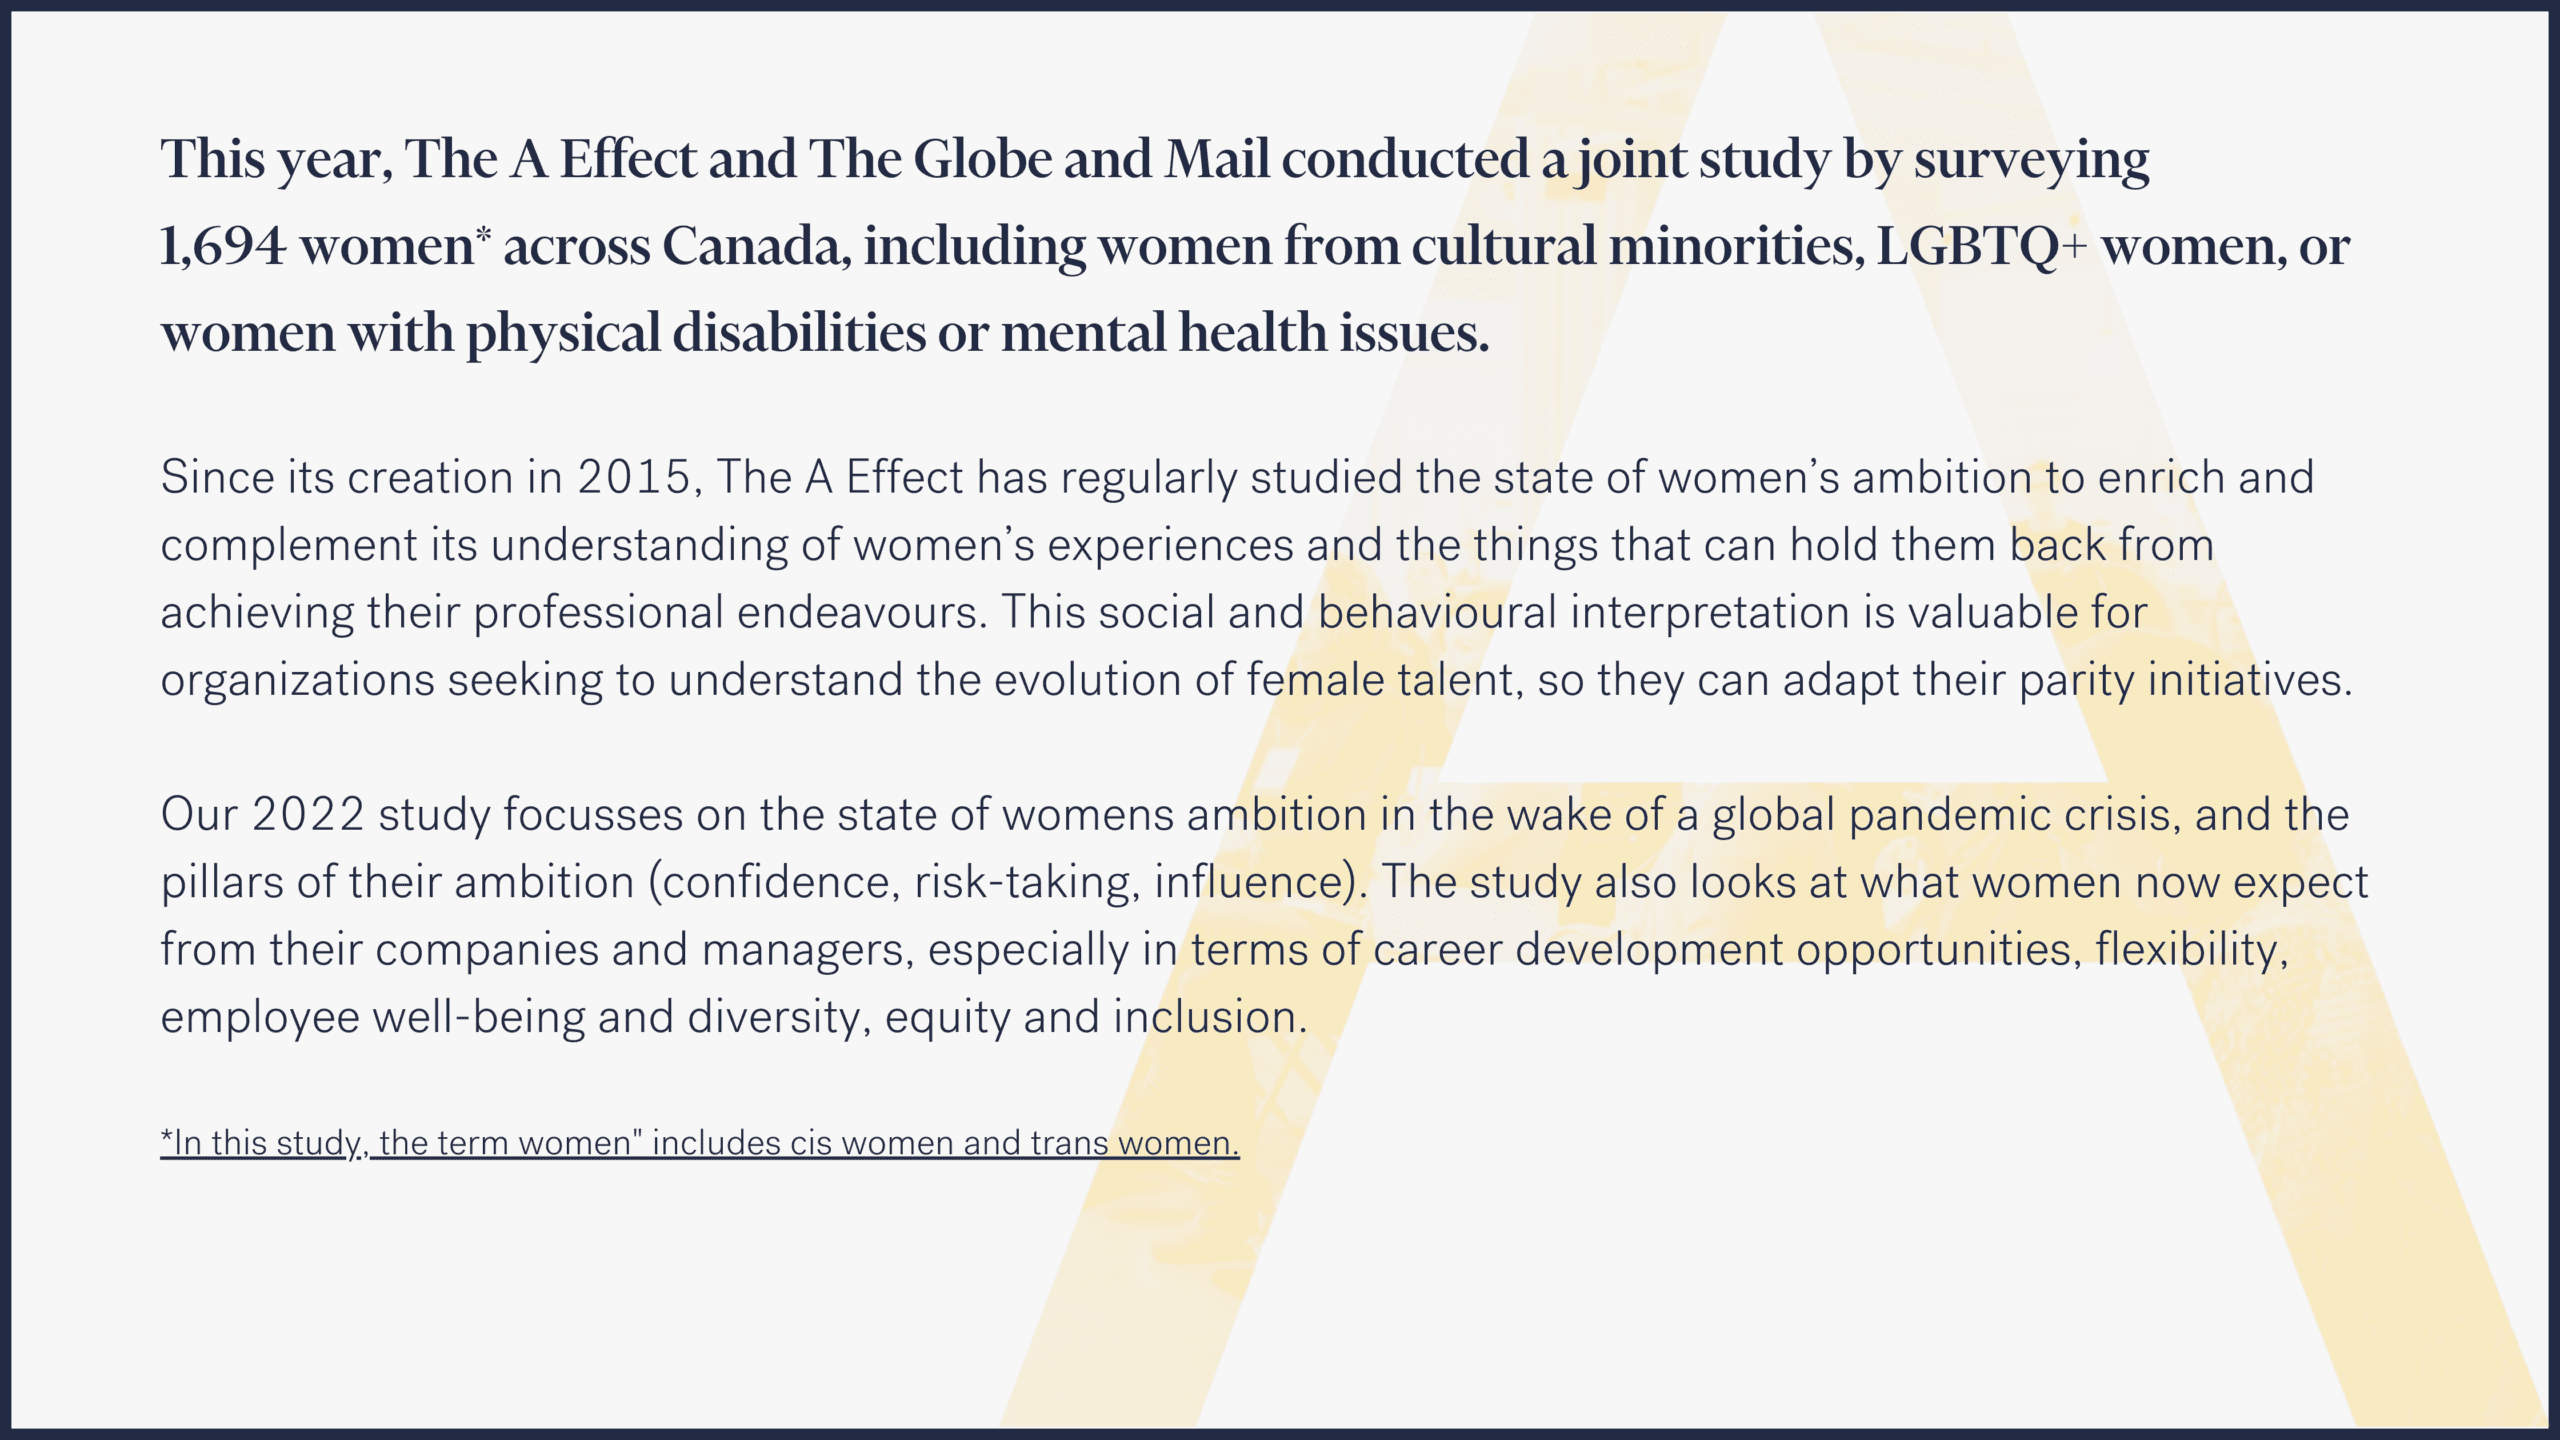 This year, The A Effect and The Globe and Mail conducted a joint study by surveying 1,694 women* across Canada, including women from cultural minorities, LGBTQ+ women, or women with physical disabilities or mental health issues.